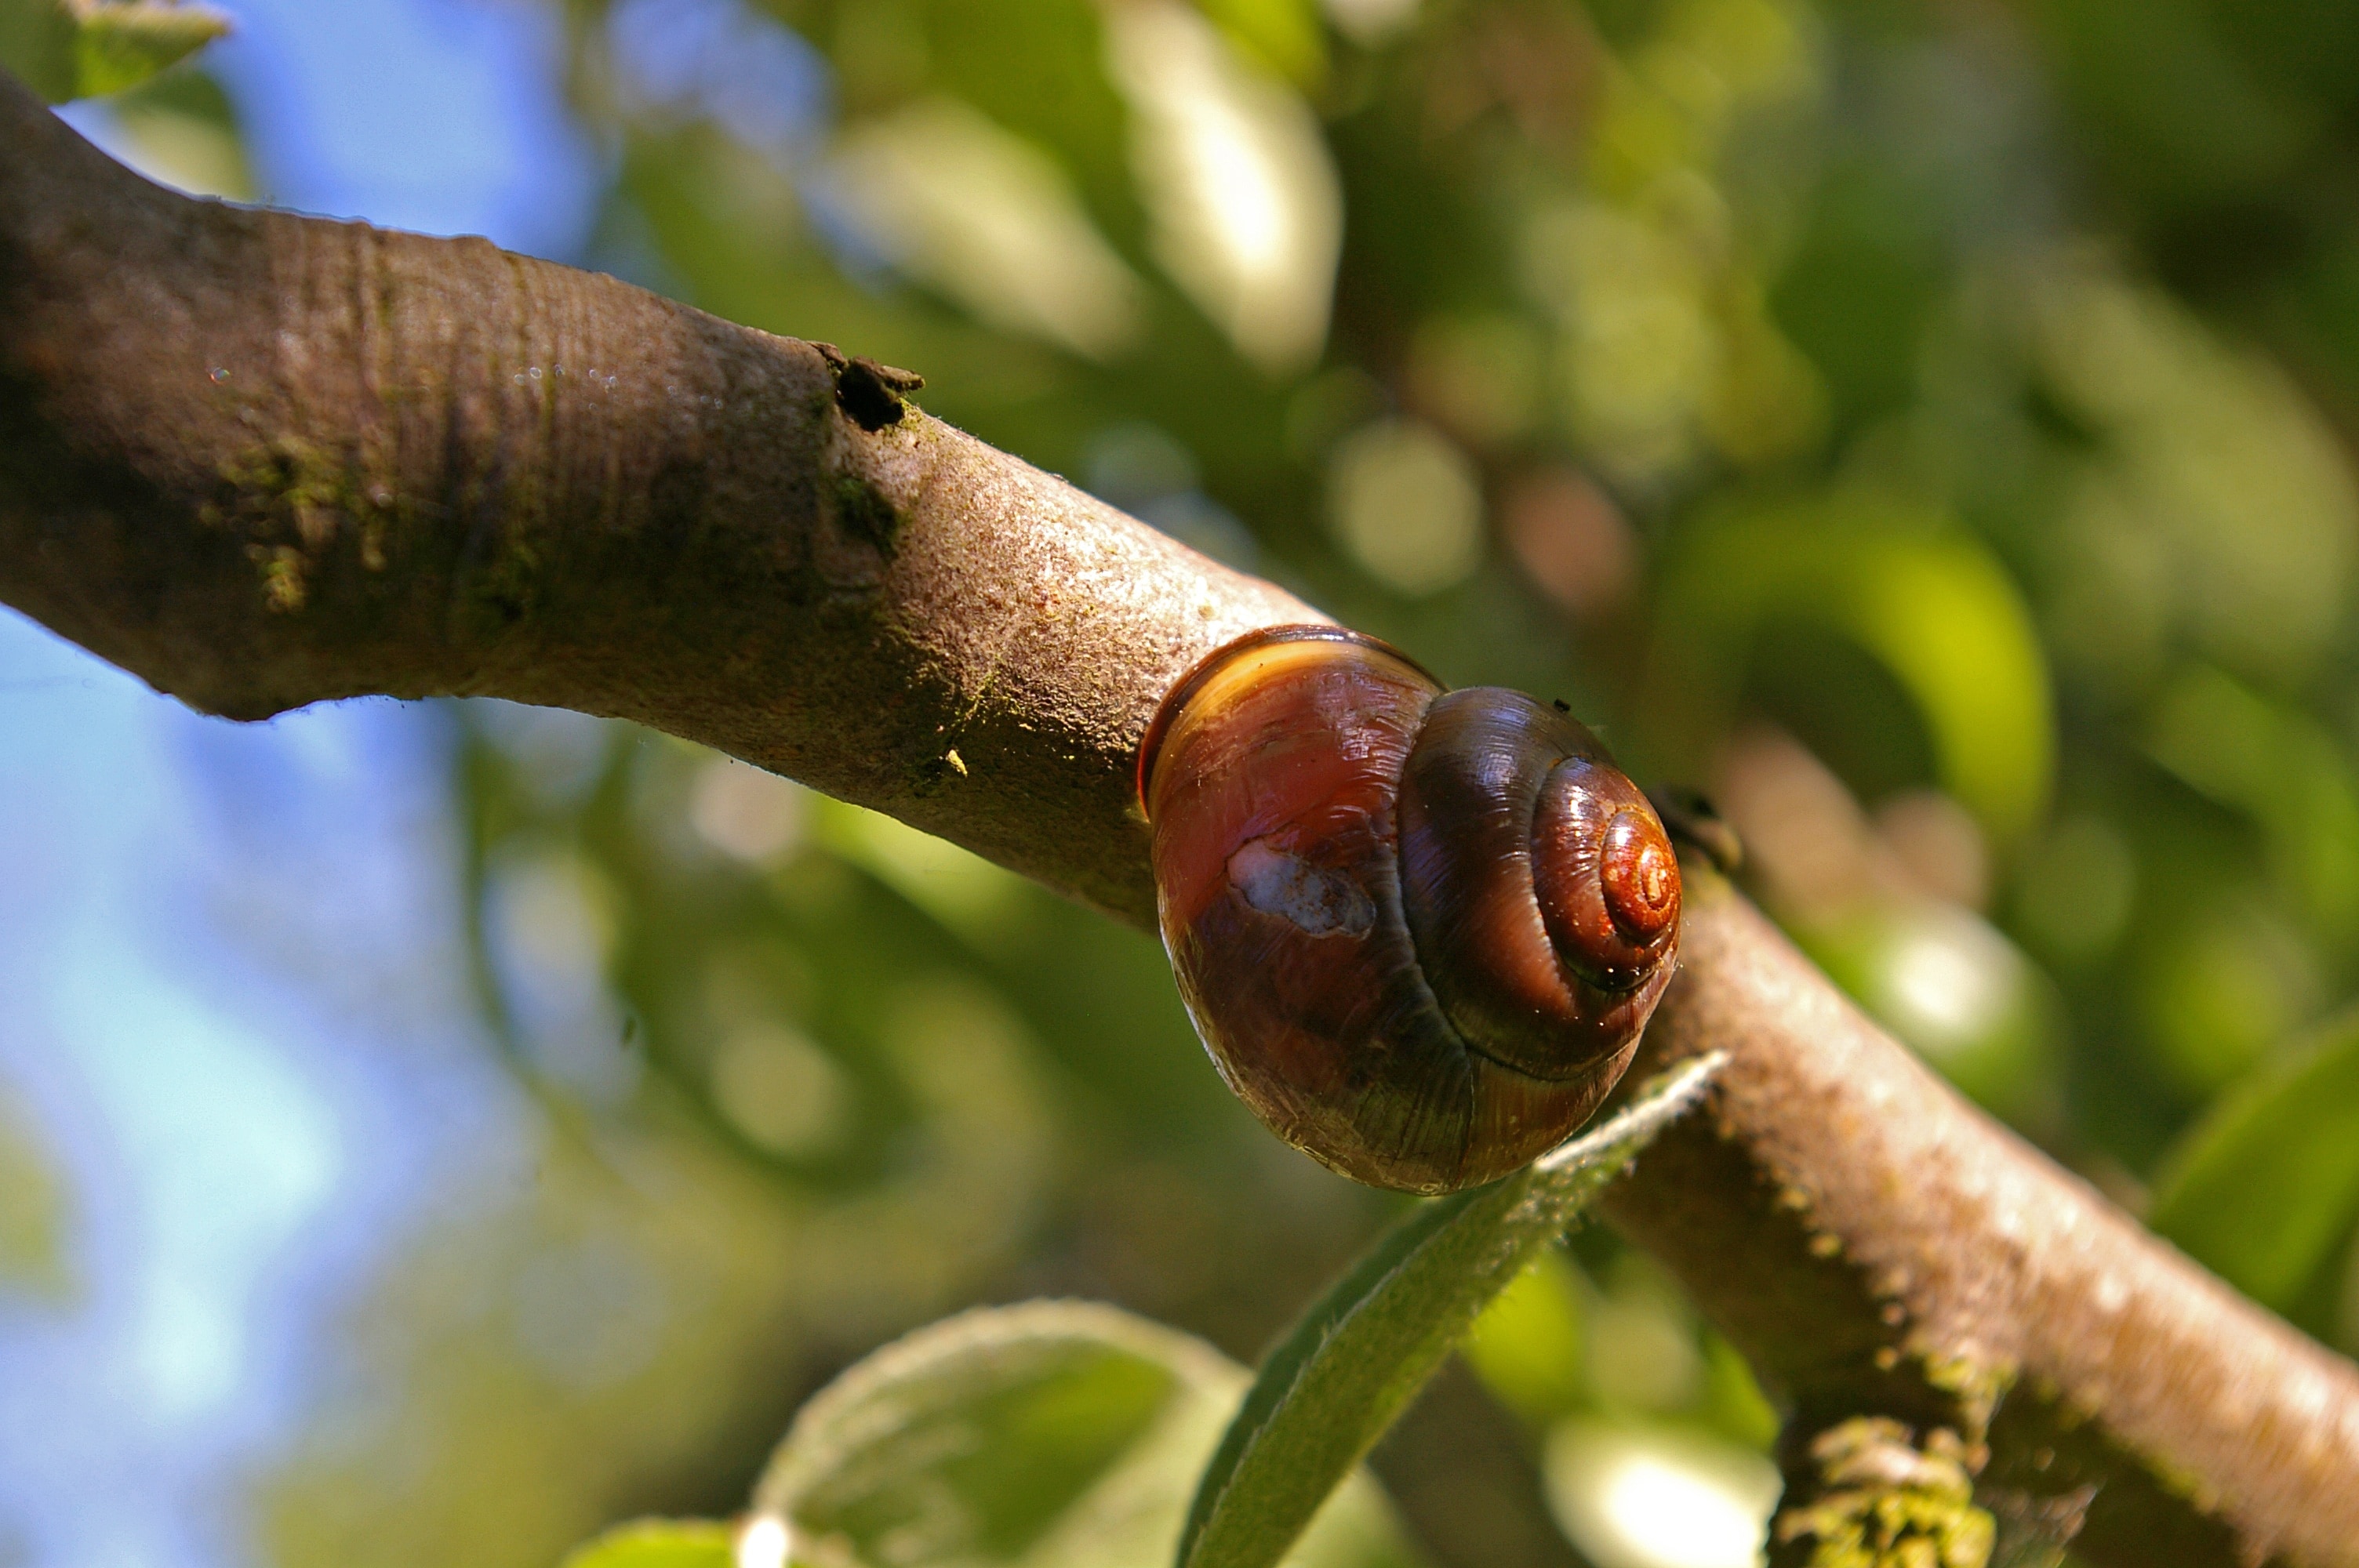 brown snail shell on tree branch